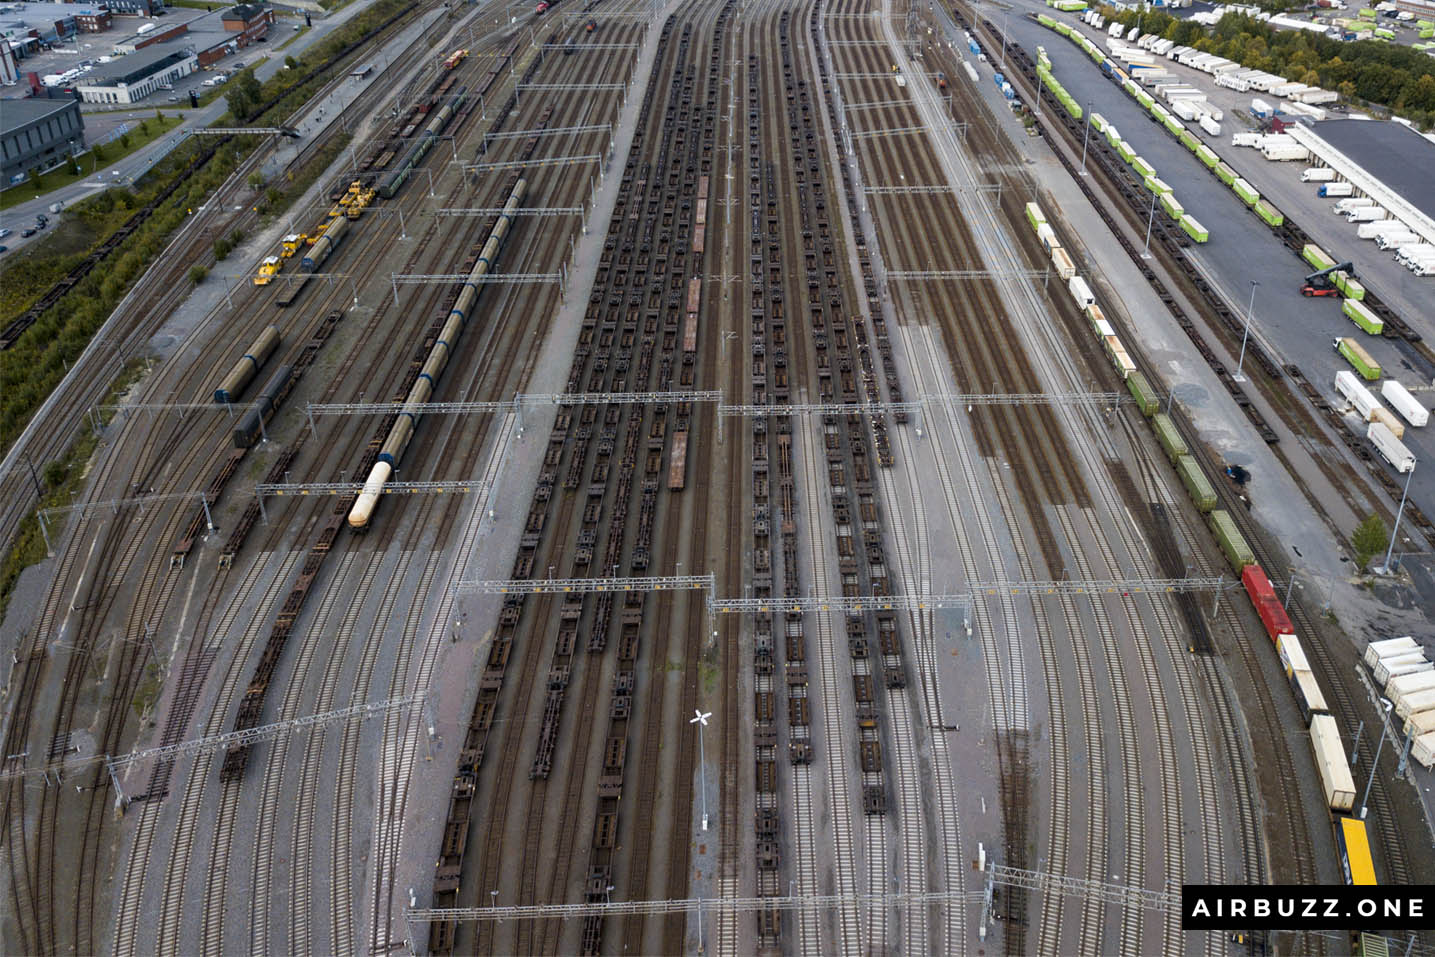 The parallel lines with train wagons looks great from above.